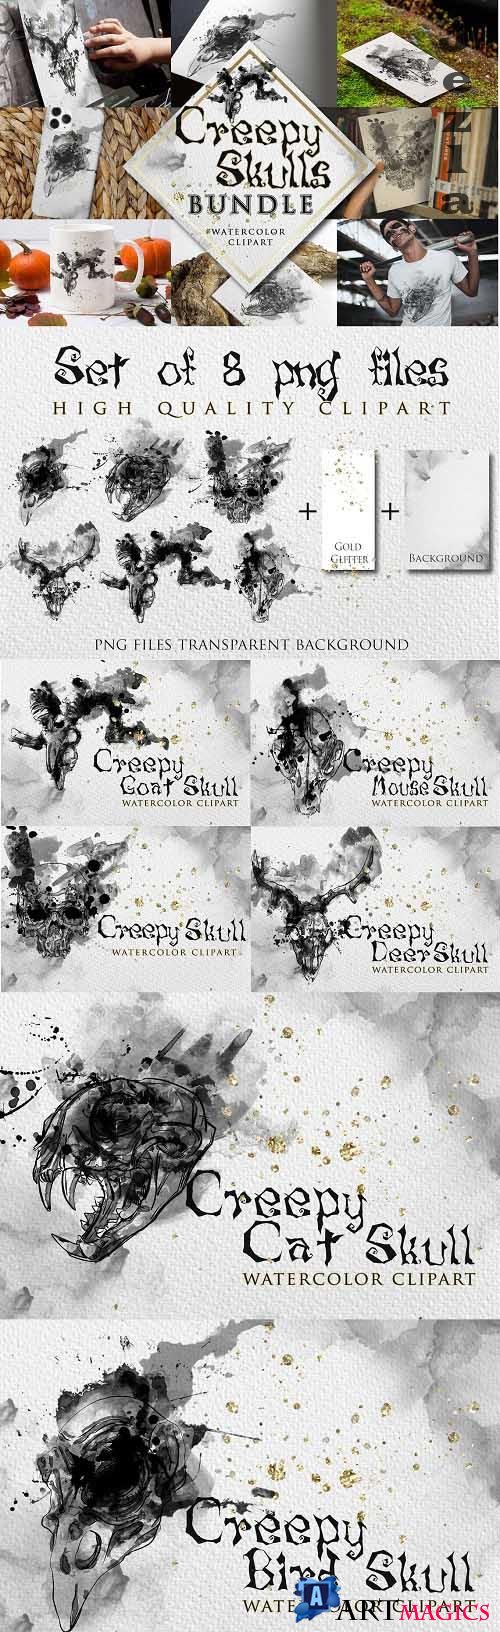 Creepy Animal Skulls Bundle Clipart, gothic occult witch clipart, Scary Skull, Mystical png